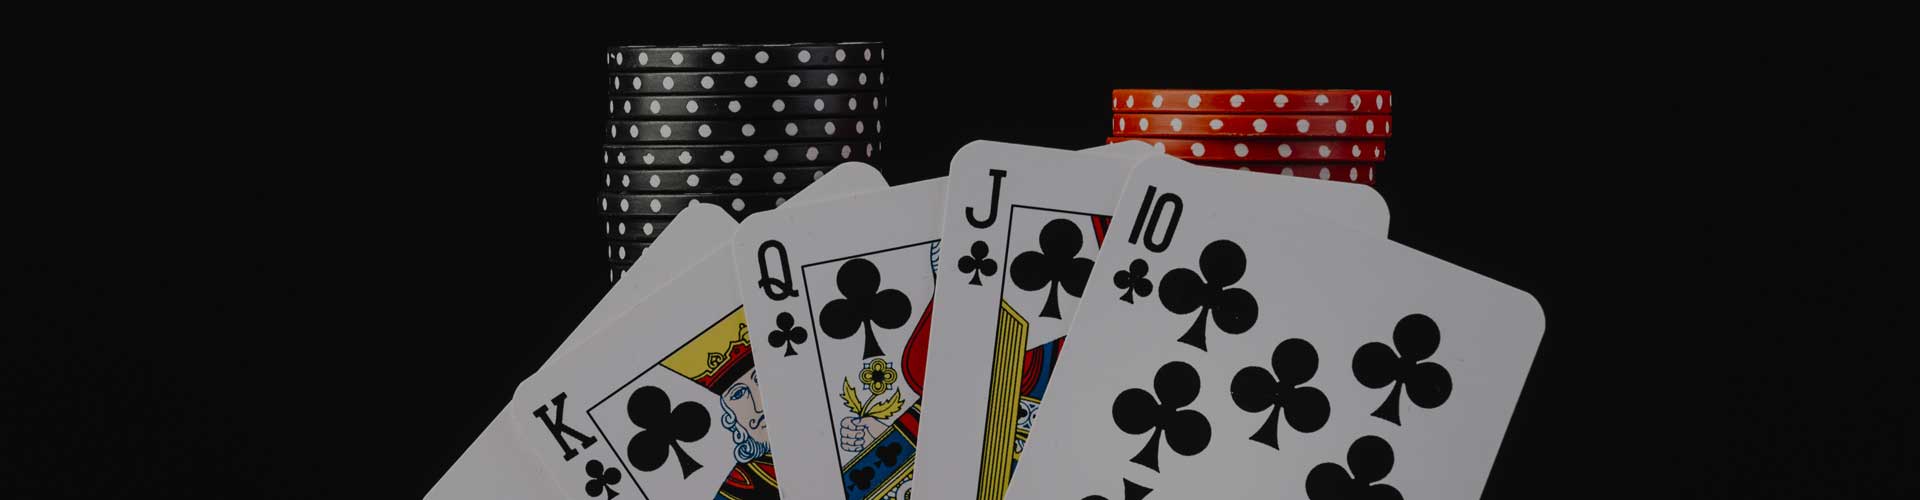 Royal Flush of poker in sequence at blog for welcoming subscribers to email list at fast deliver